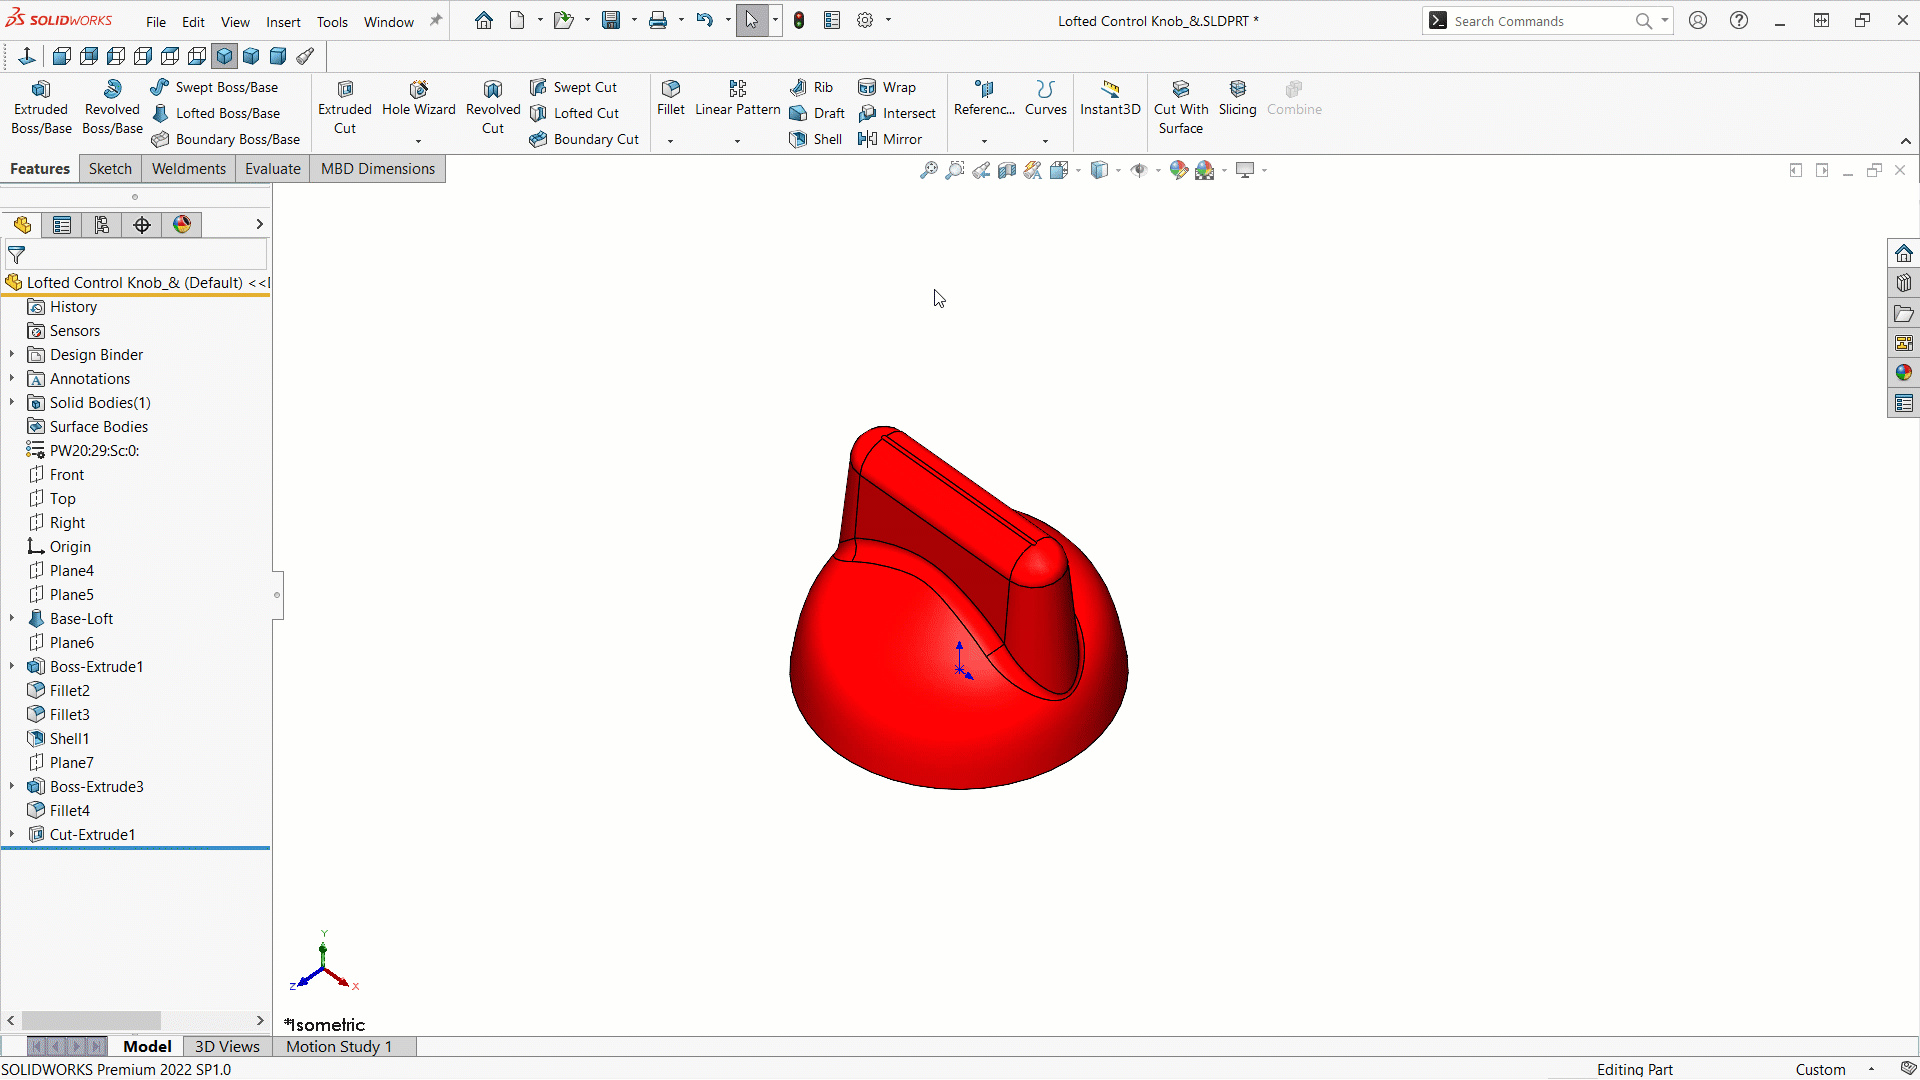 Minimize mouse movement, 4 1/2 Methods to Minimize Mouse Movement in SOLIDWORKS